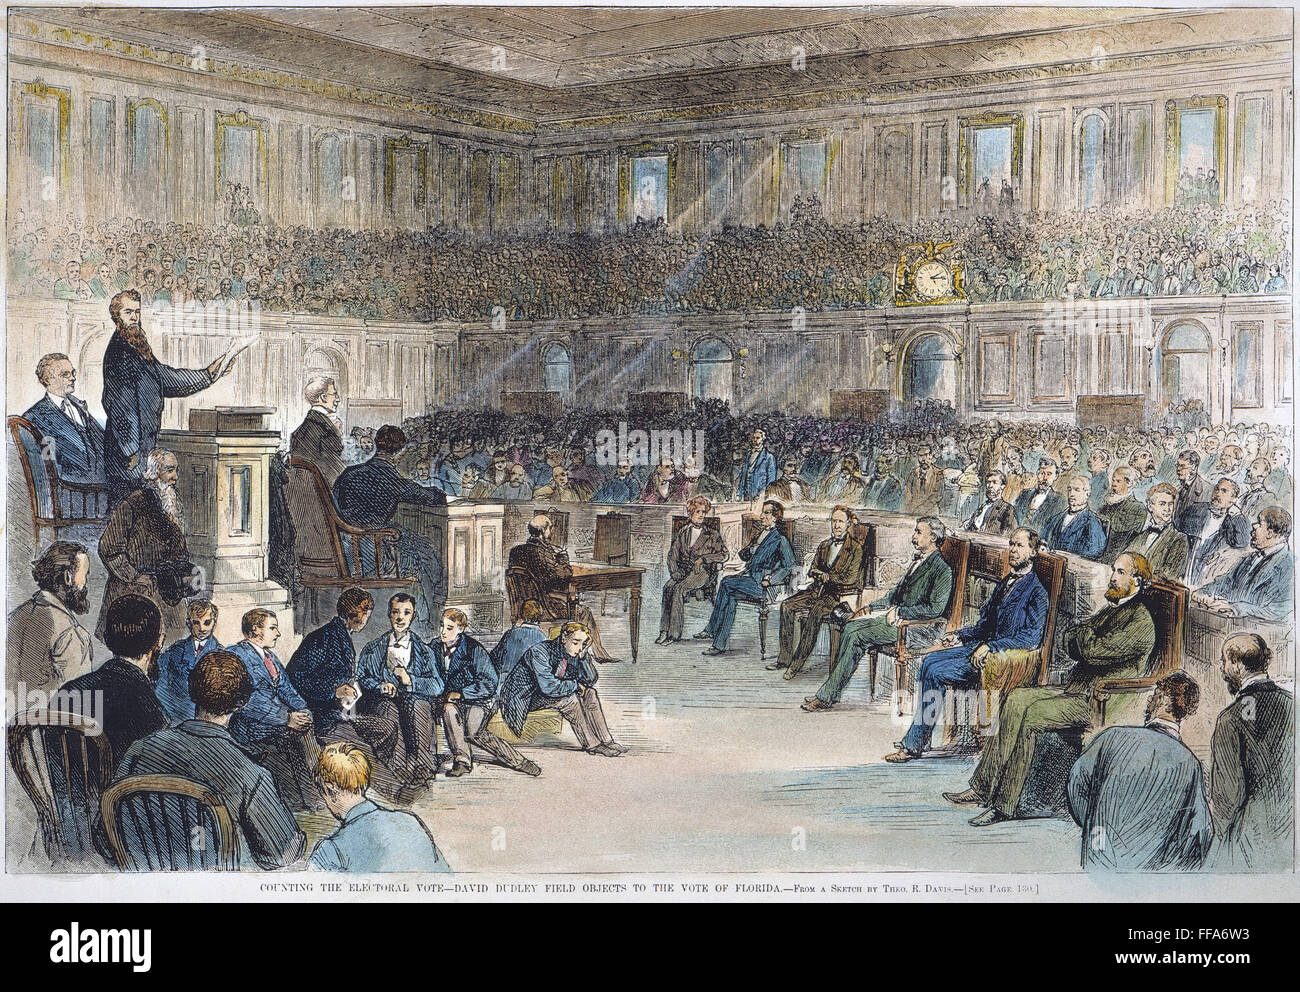 ELECTORAL COMMISSION, 1877. /n'Florida Case.' Rep. David Dudley Field appearing before the Electoral Commission created to resolve twenty disputed electoral votes, including four from Florida, in the 1876 presidential election between Republican Rutherfor Stock Photo